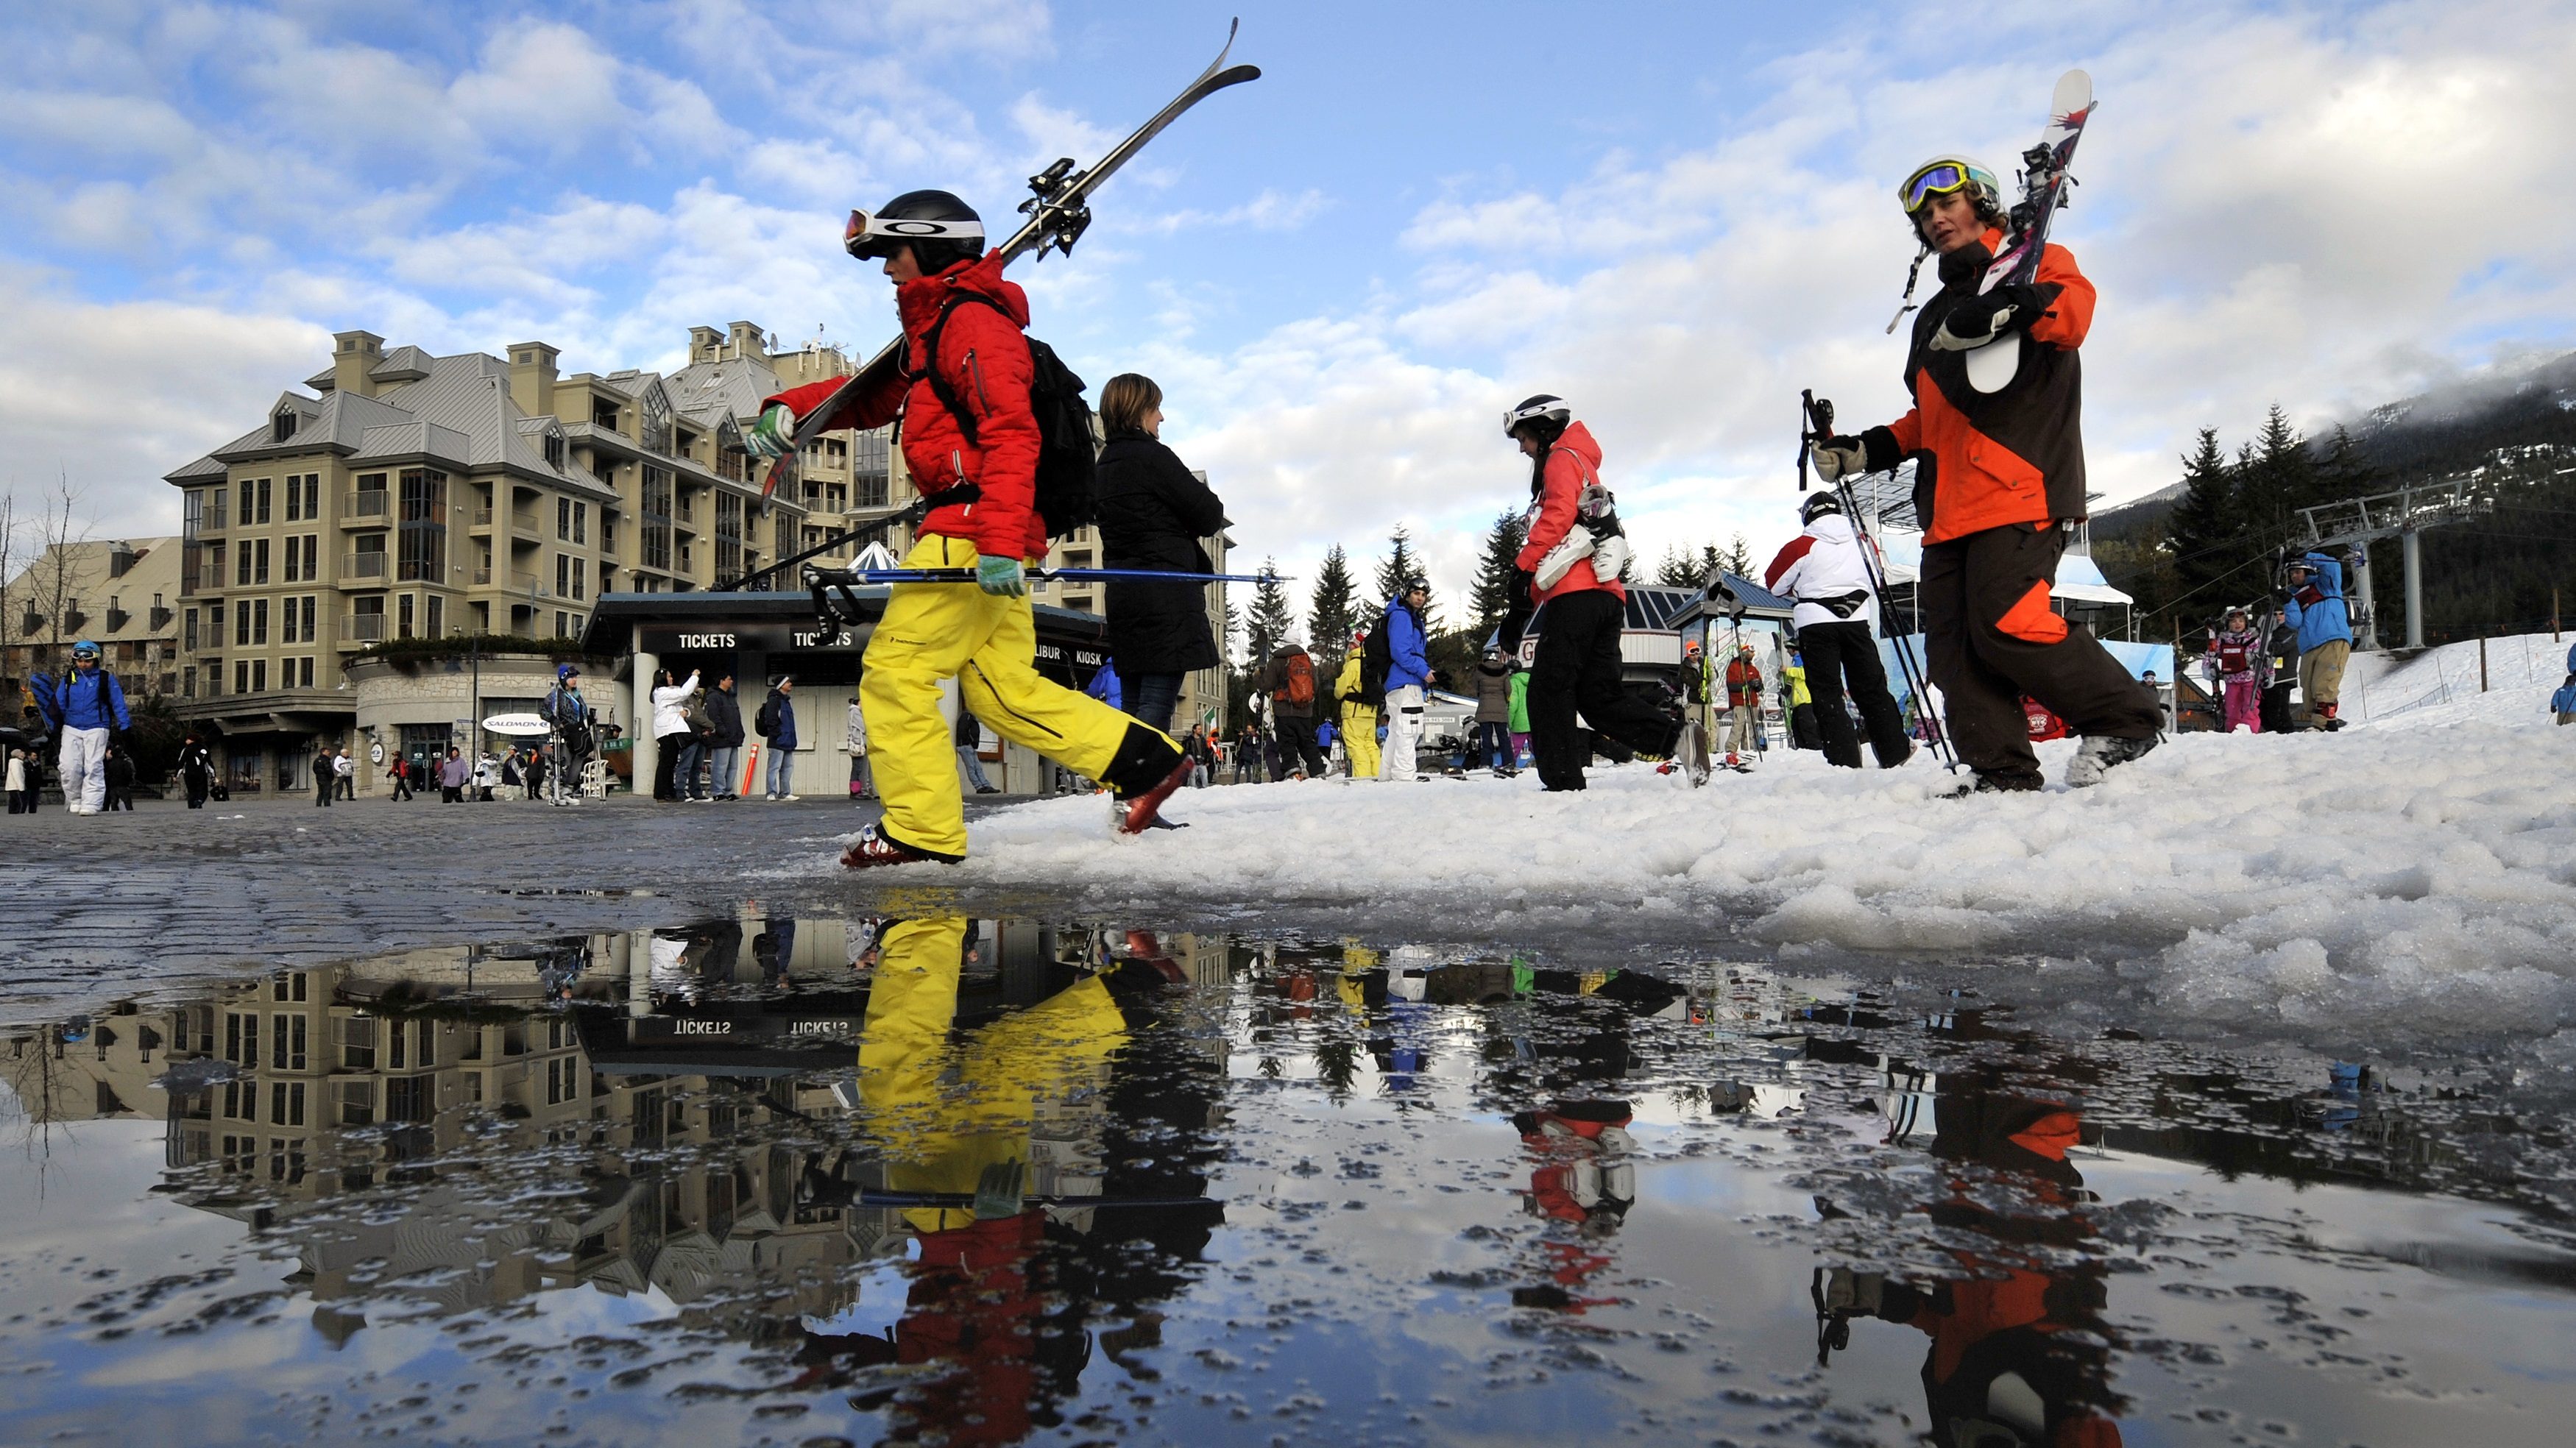 Climate Change Could Limit Number of Winter Olympics Hosts: Study